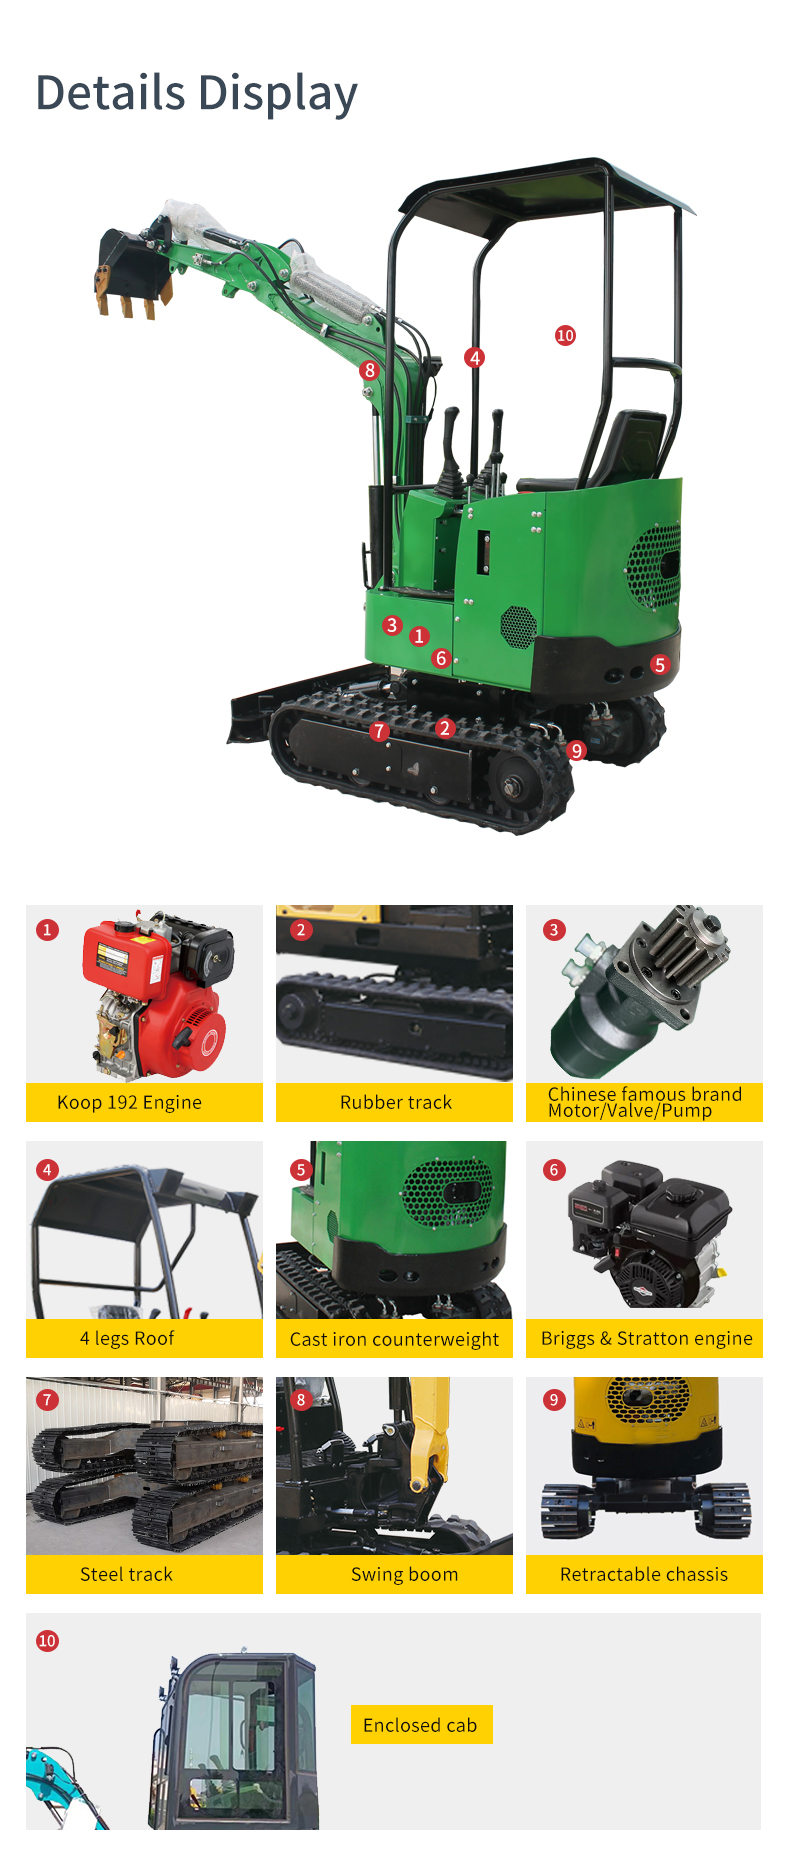 1000 kg mini excavator is widely used, such as digging ditches, planting trees, building gardens, cleaning weeds and branches, and so on